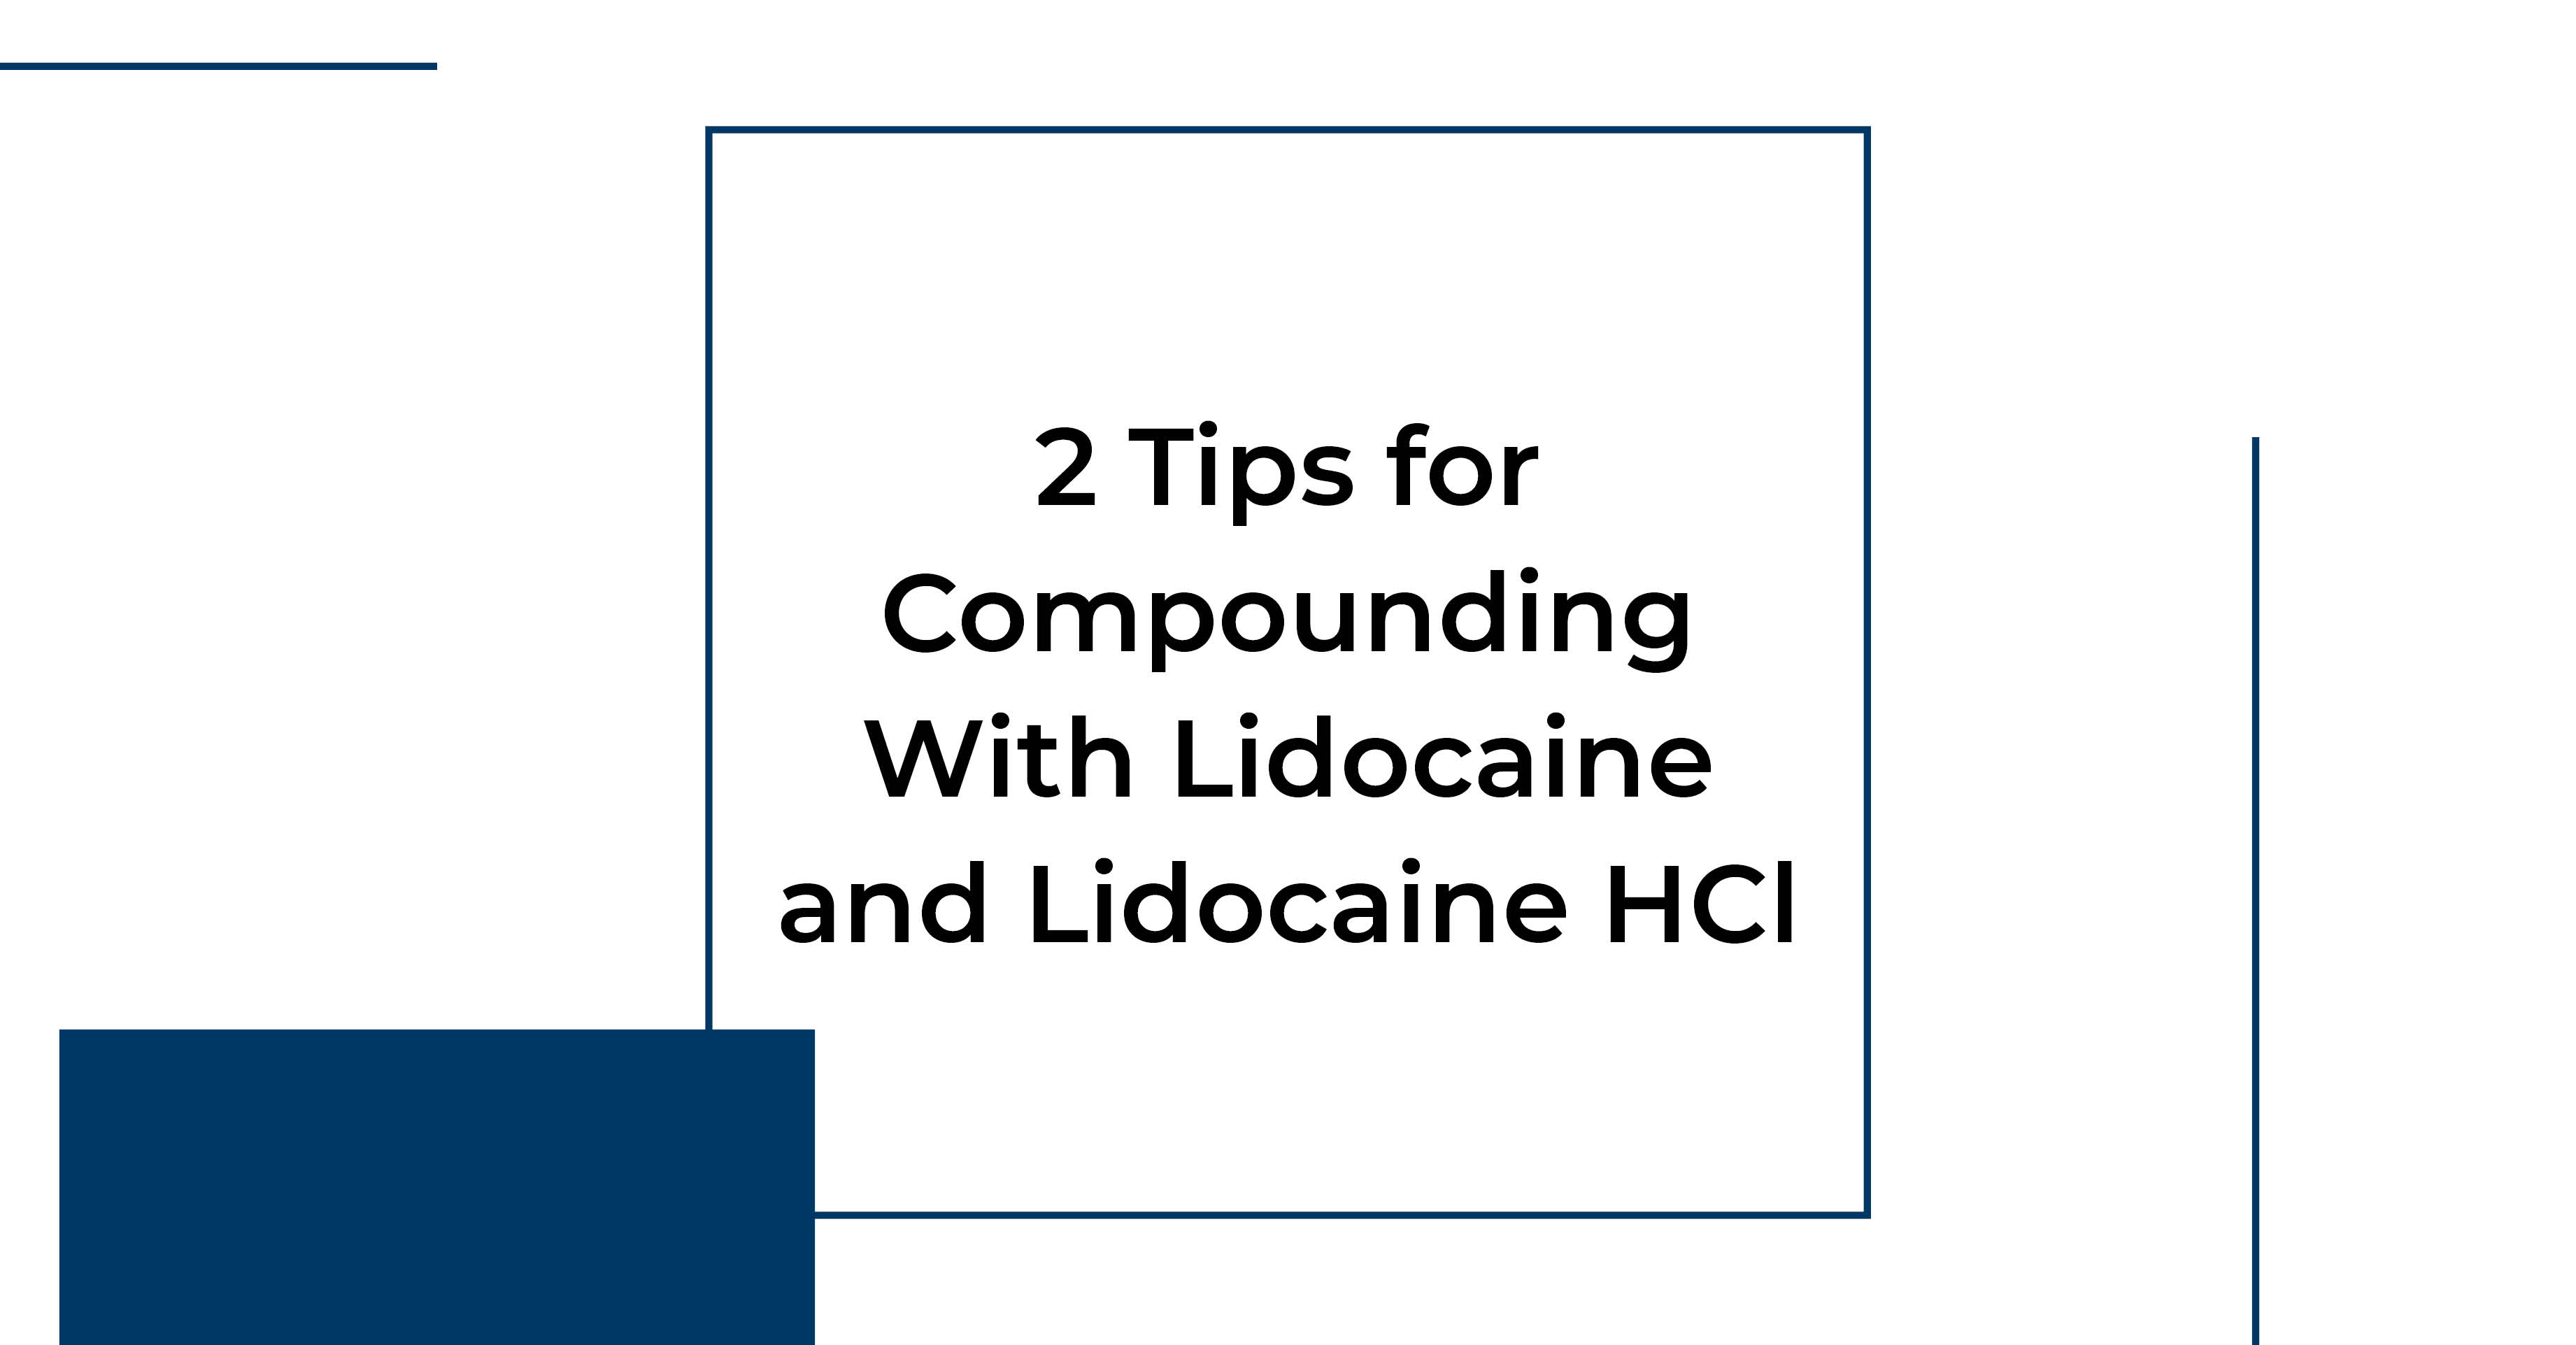 2_tips_for_compounding_with_lidocaine_and_lidocaine_hcl.jpg